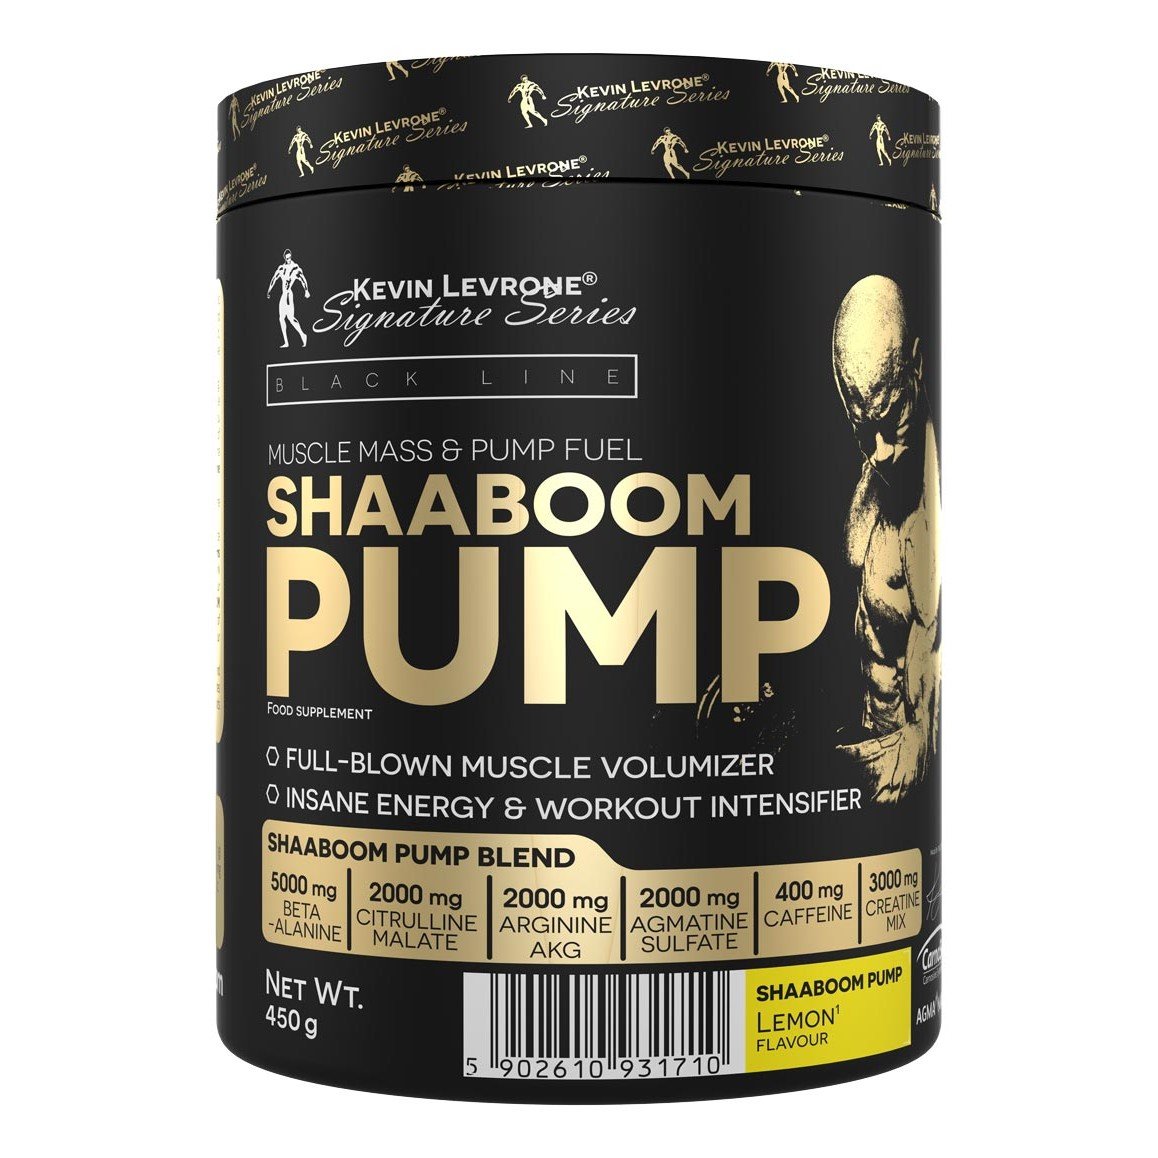 Shaaboom Pump, 385 g, Kevin Levrone. Pre Workout. Energy & Endurance 